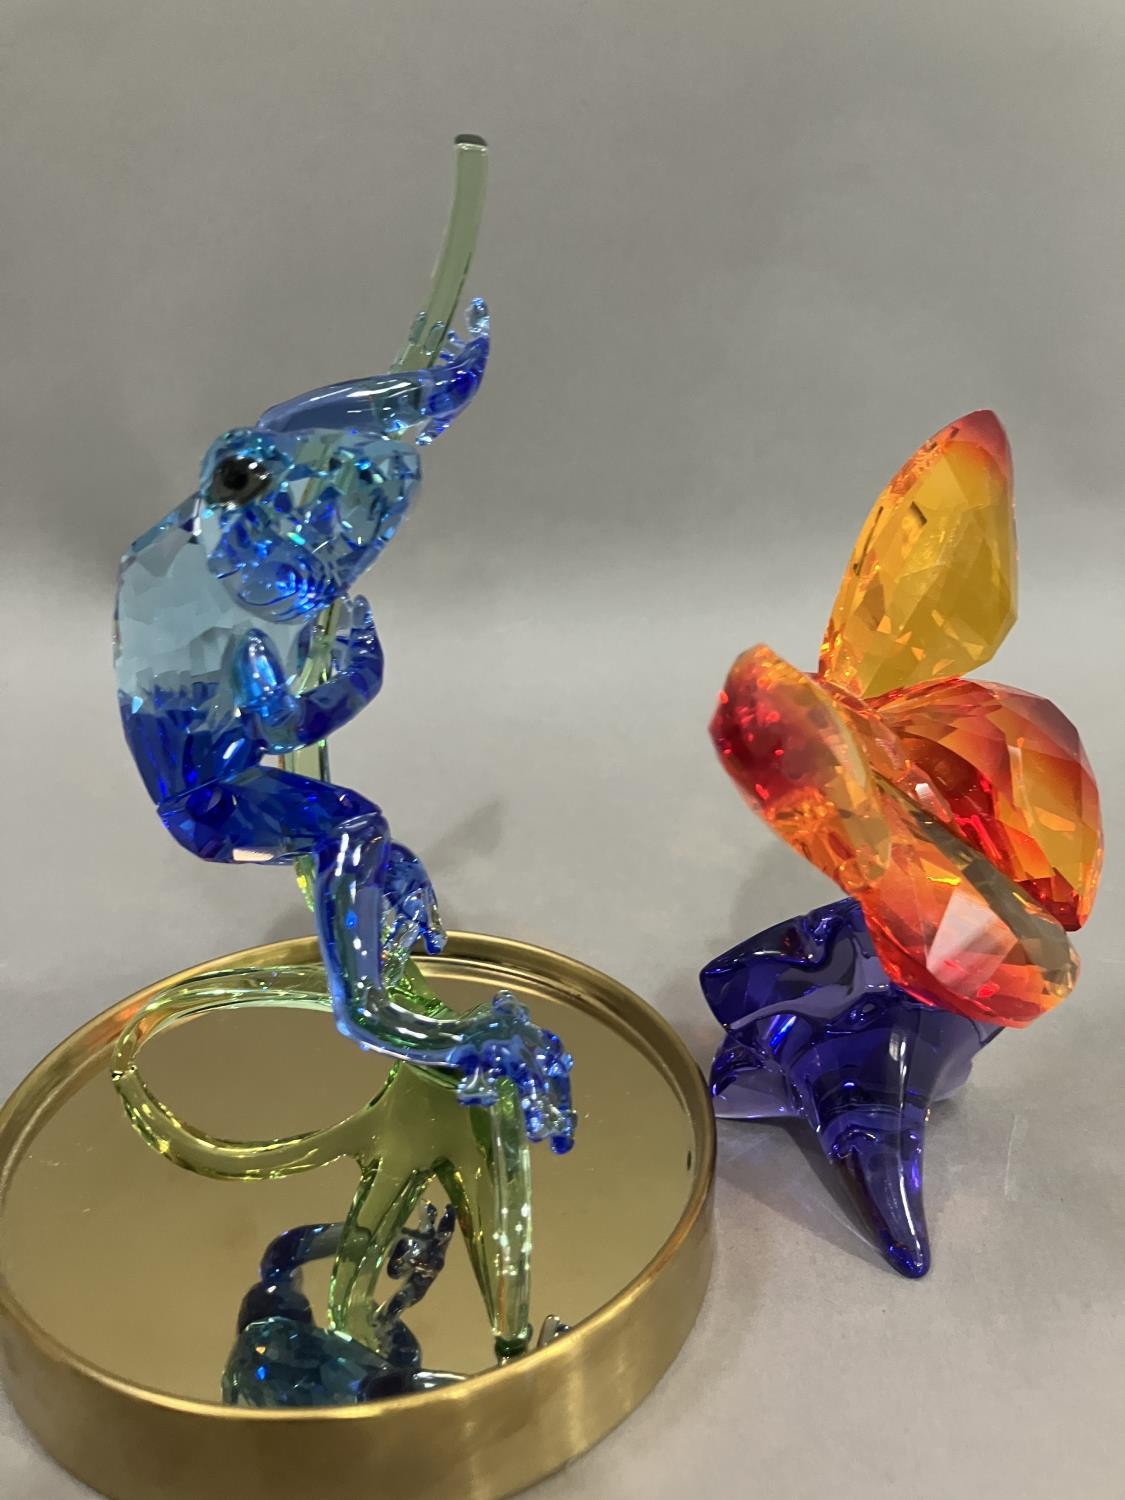 A Swarovski crystal blue frog on branch in glass dome together with an orange butterfly on purple - Image 2 of 3